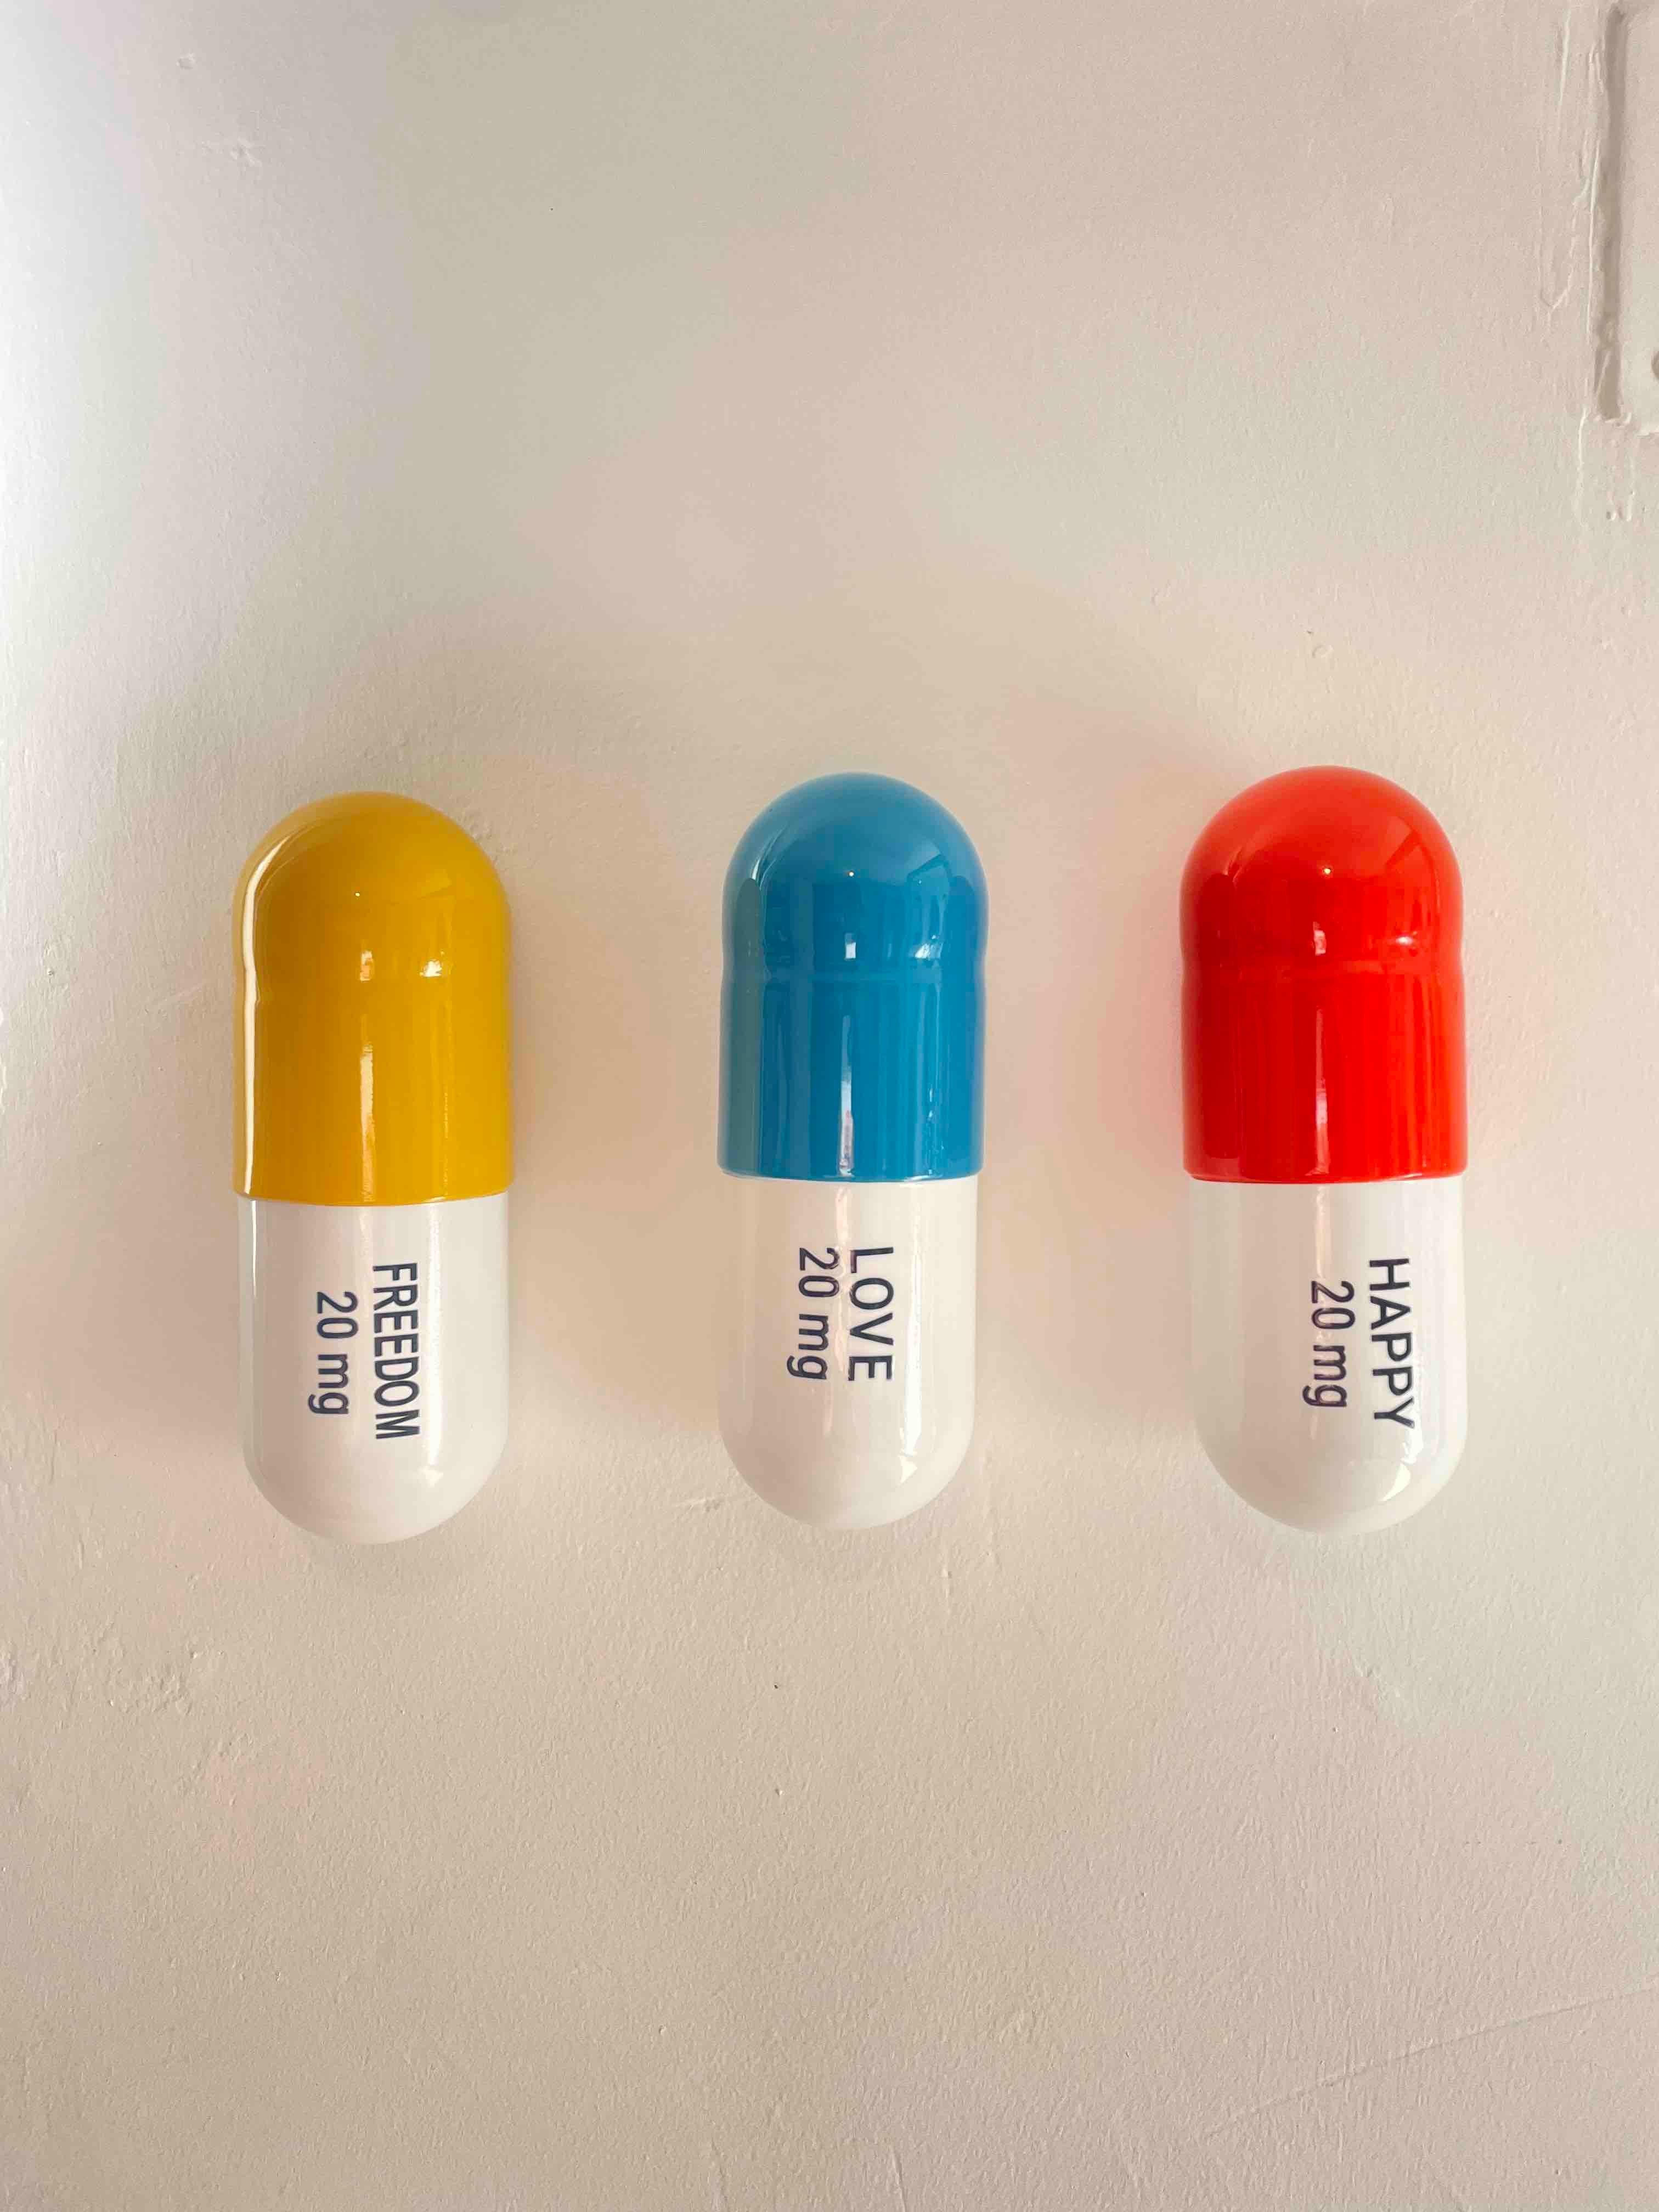 Tal Nehoray Still-Life Sculpture - 20 MG Happy pill Combo (blue, yellow and orange) - figurative sculpture